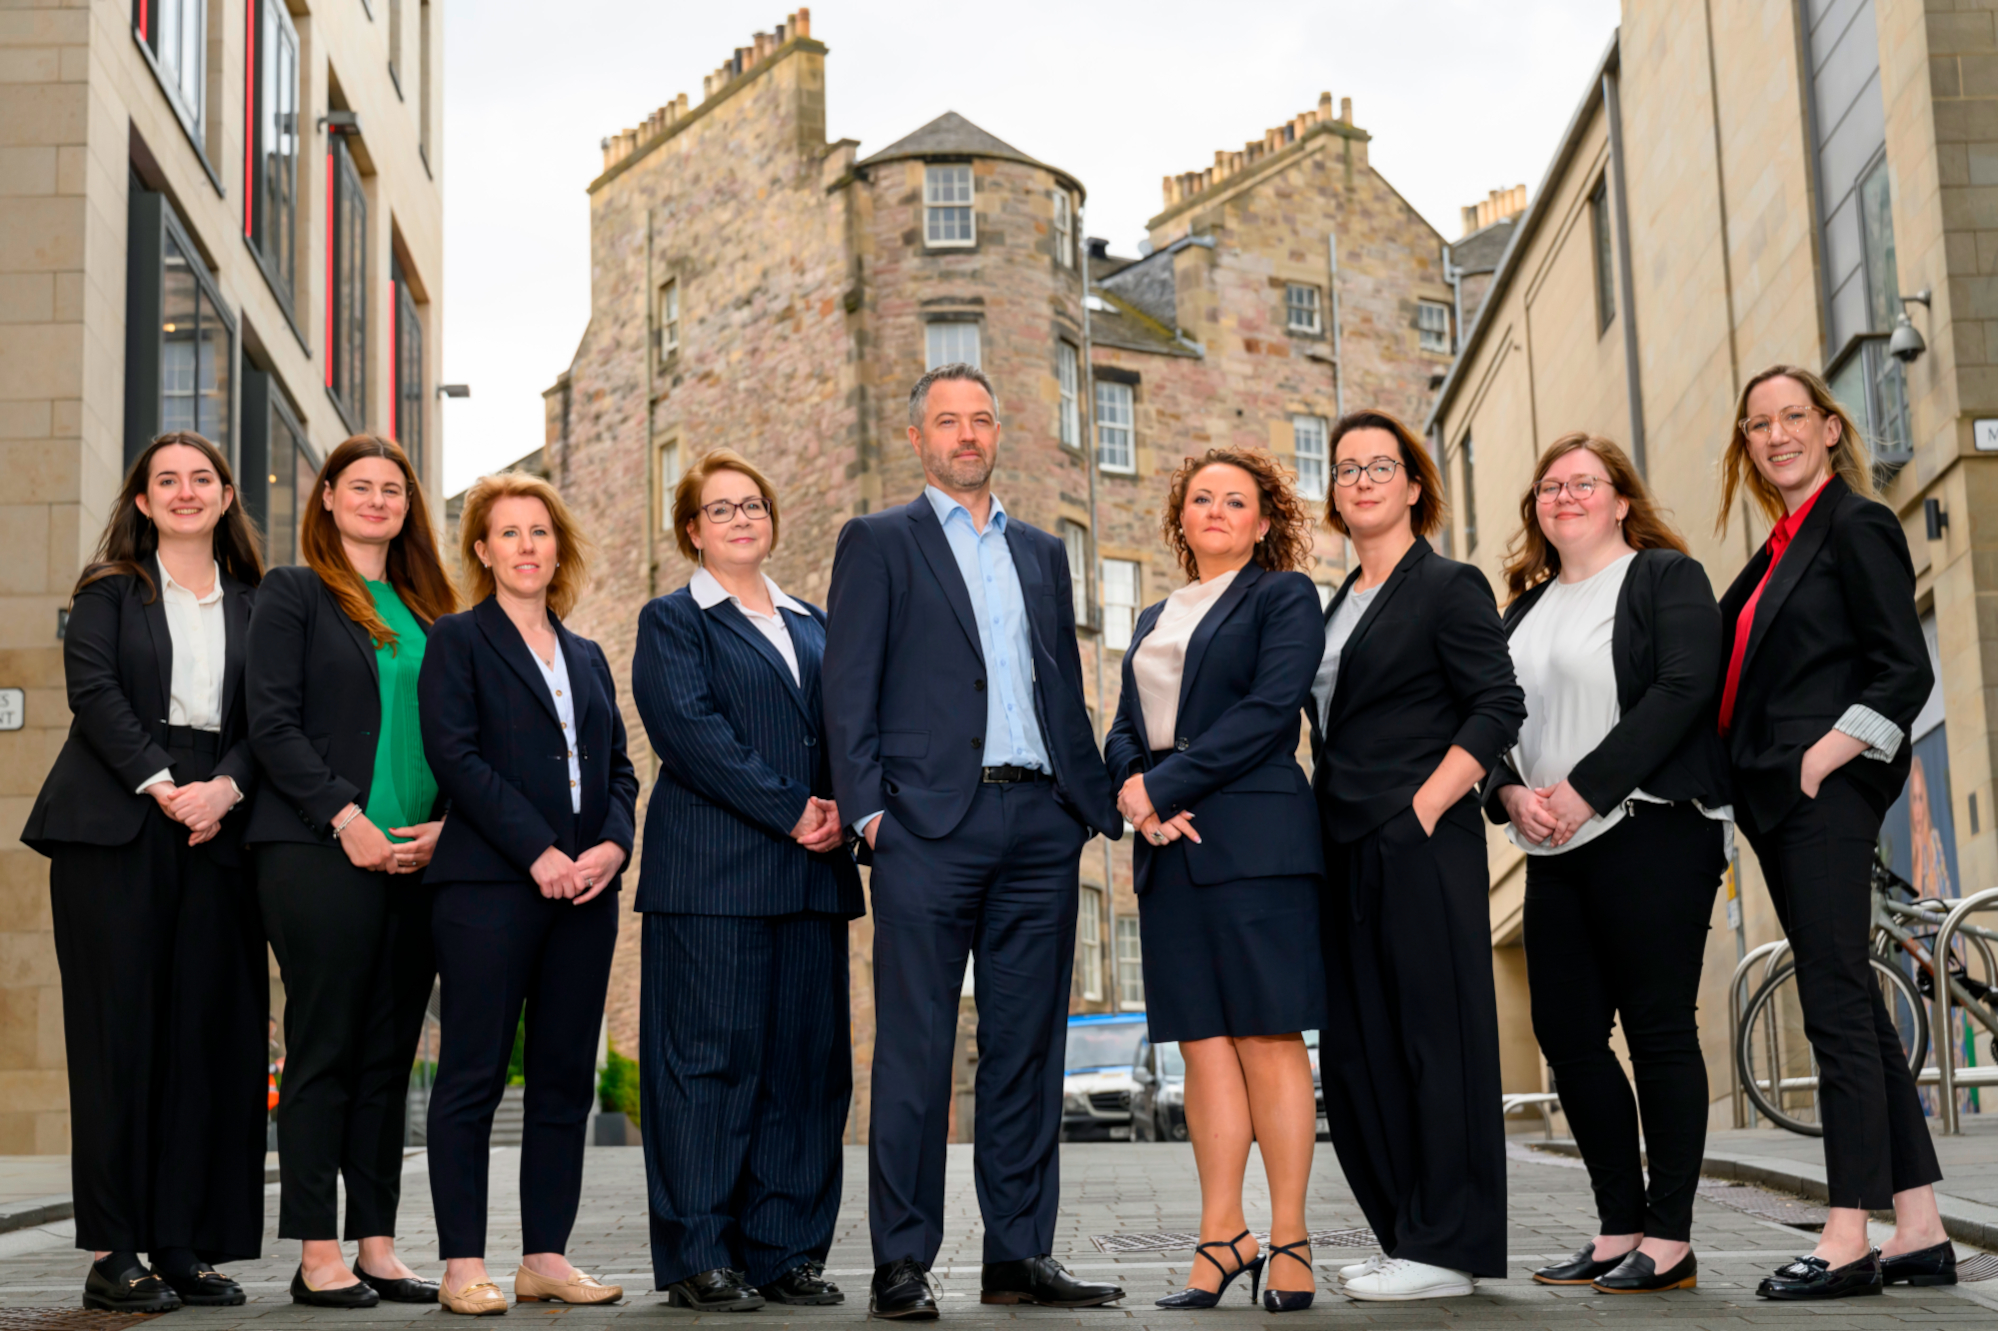 Appointments at Aberdein Considine